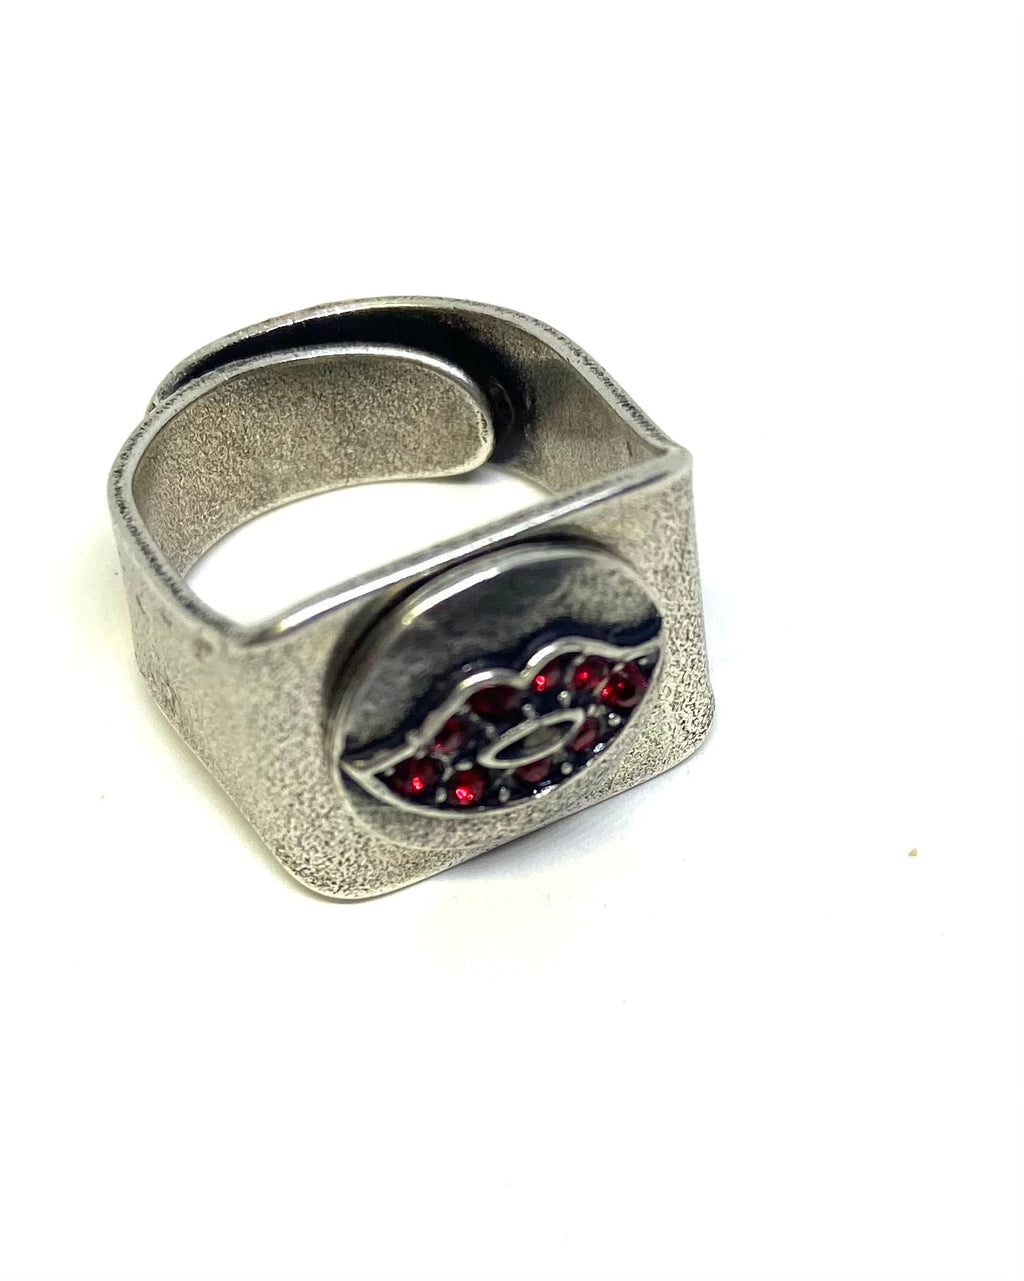 Hot Lips Adjustable Ring Set in Antique Silver